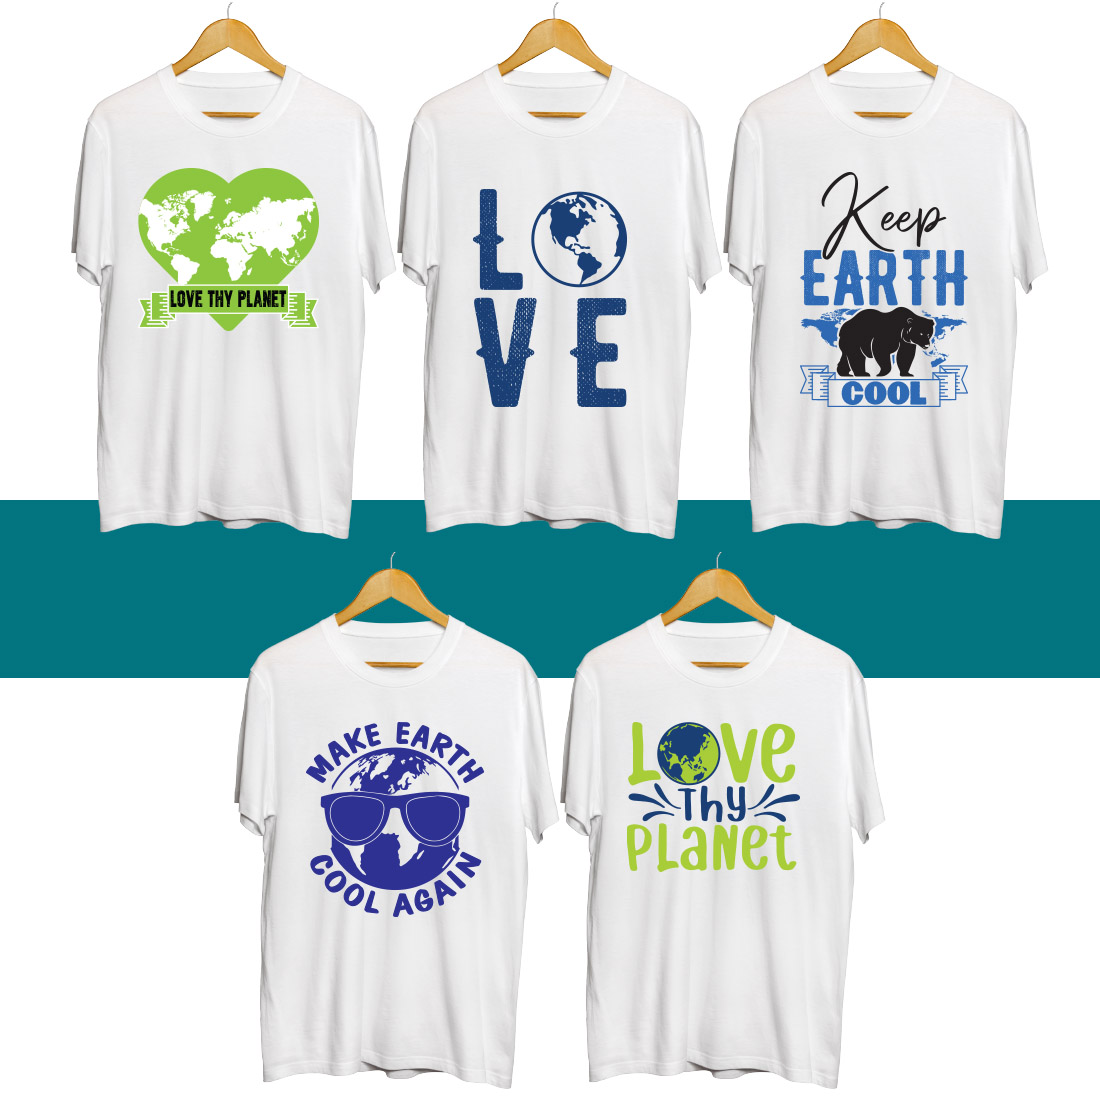 Earth Day SVG T Shirt Designs Bundle cover image.